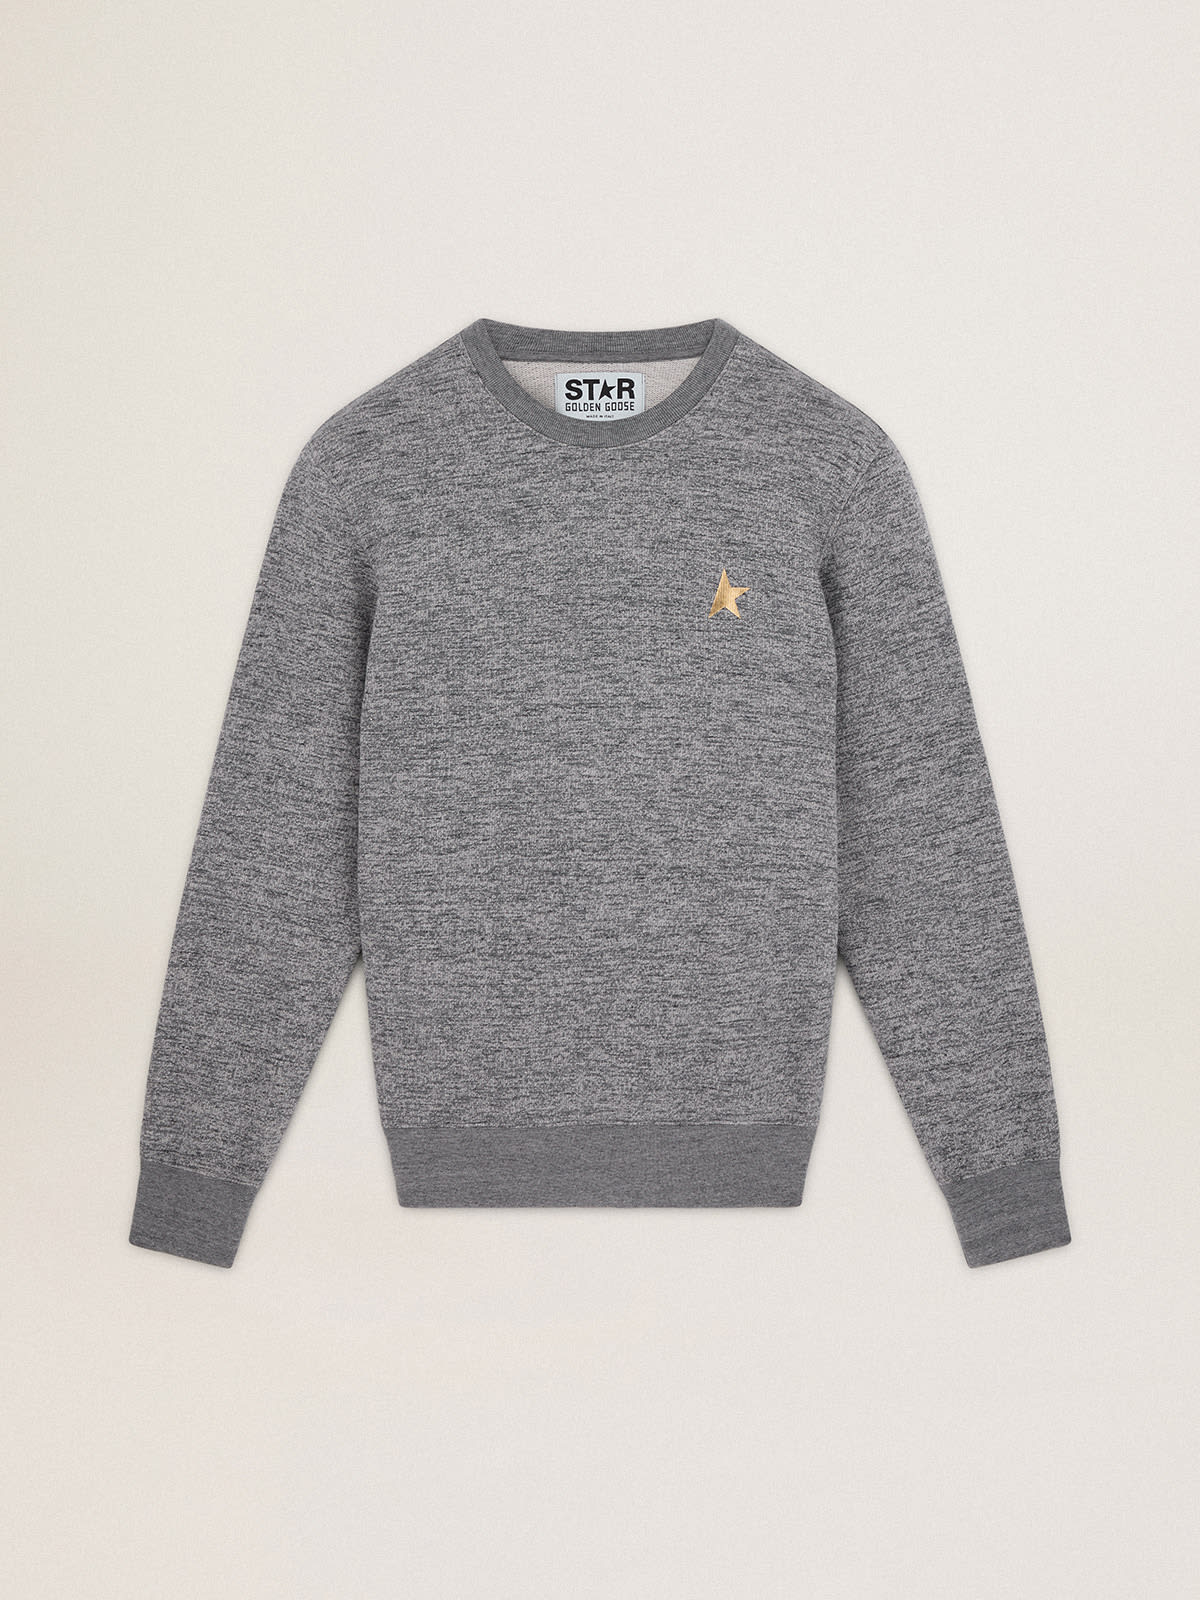 Golden Goose - Melange-gray Archibald Star Collection cotton sweatshirt with contrasting gold star on the front in 